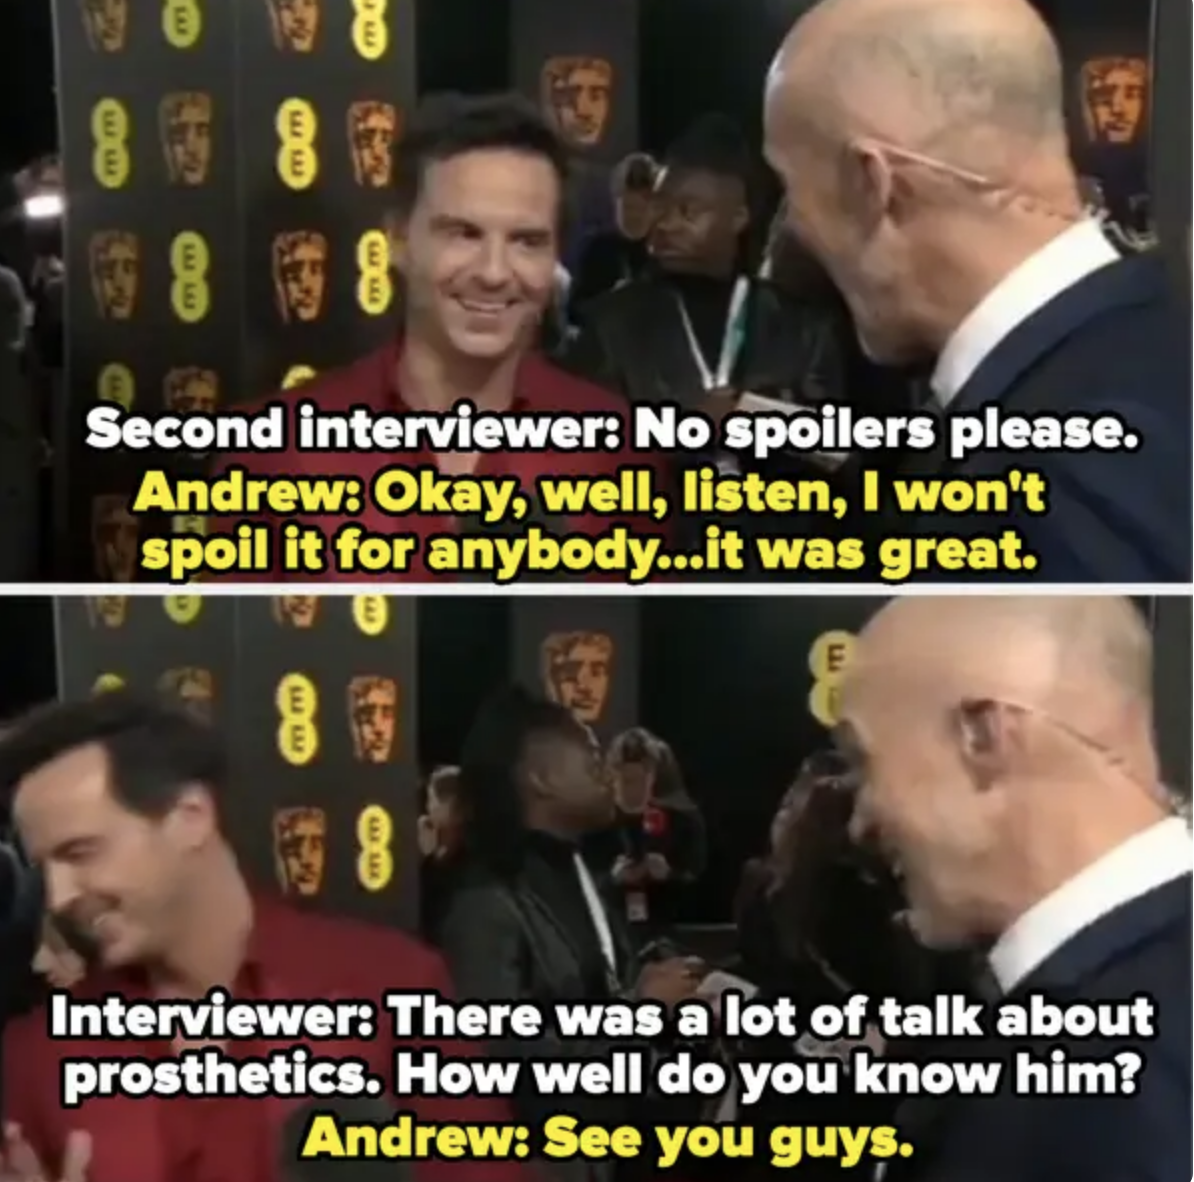 The interviewer asks Andrew if Barry wore a prosthetic for the scene, and Andrew says &quot;see you guys&quot;